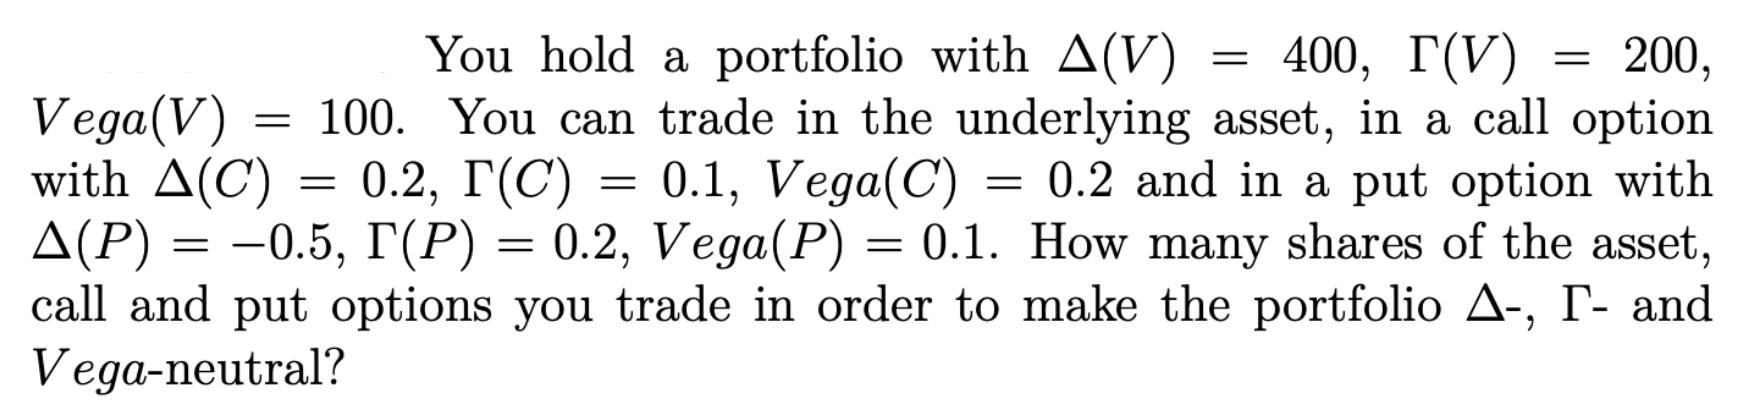 You hold a portfolio with A(V) 200, 400, T(V) Vega(V) = 100. You can trade in the underlying asset, in a call